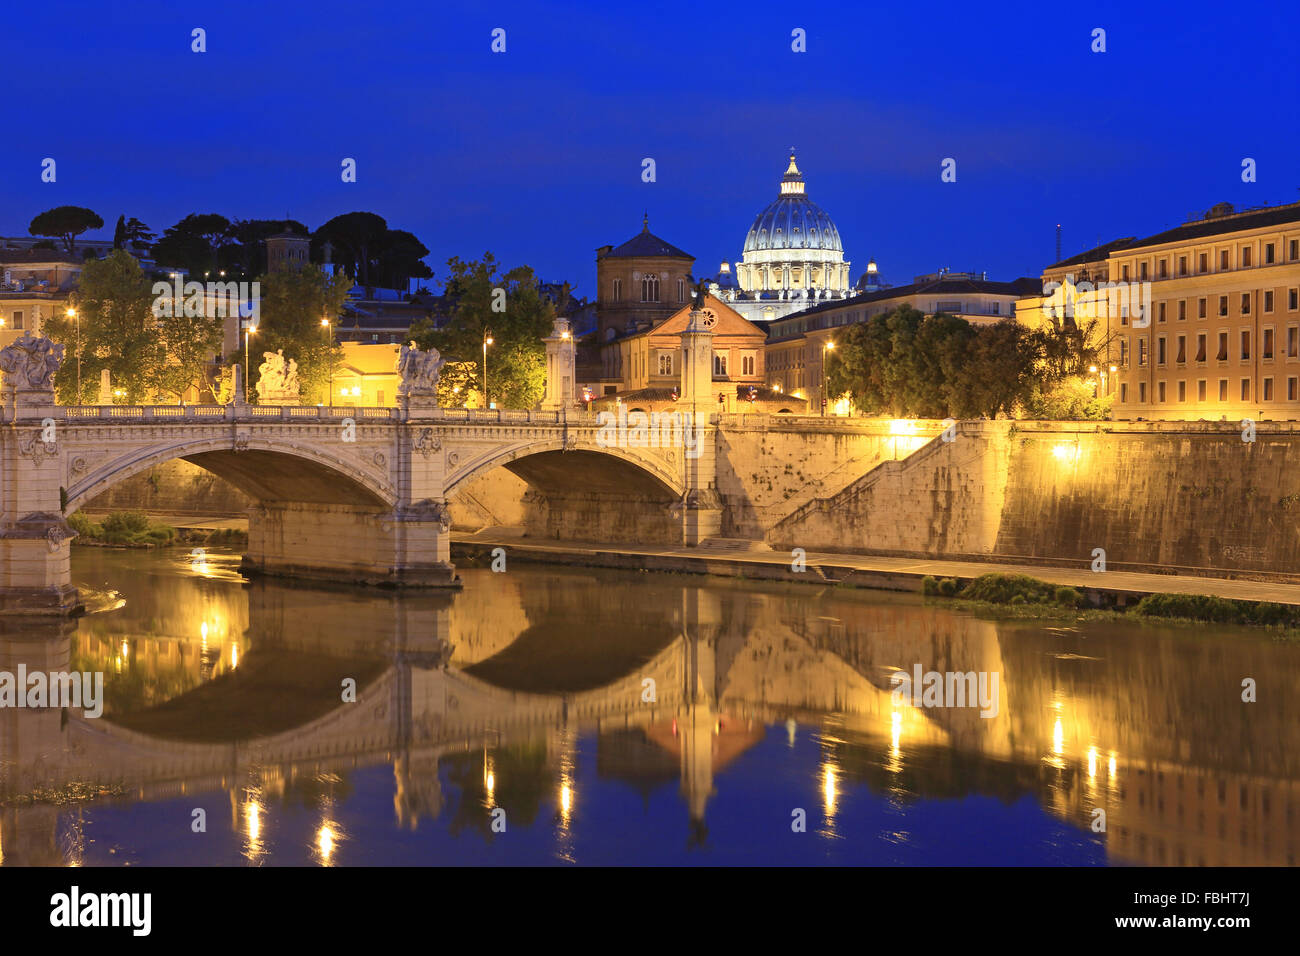 Sant'Angelo Bridge over River Tiber and St Peter's Basilica at dawn, Rome, Italy. Stock Photo